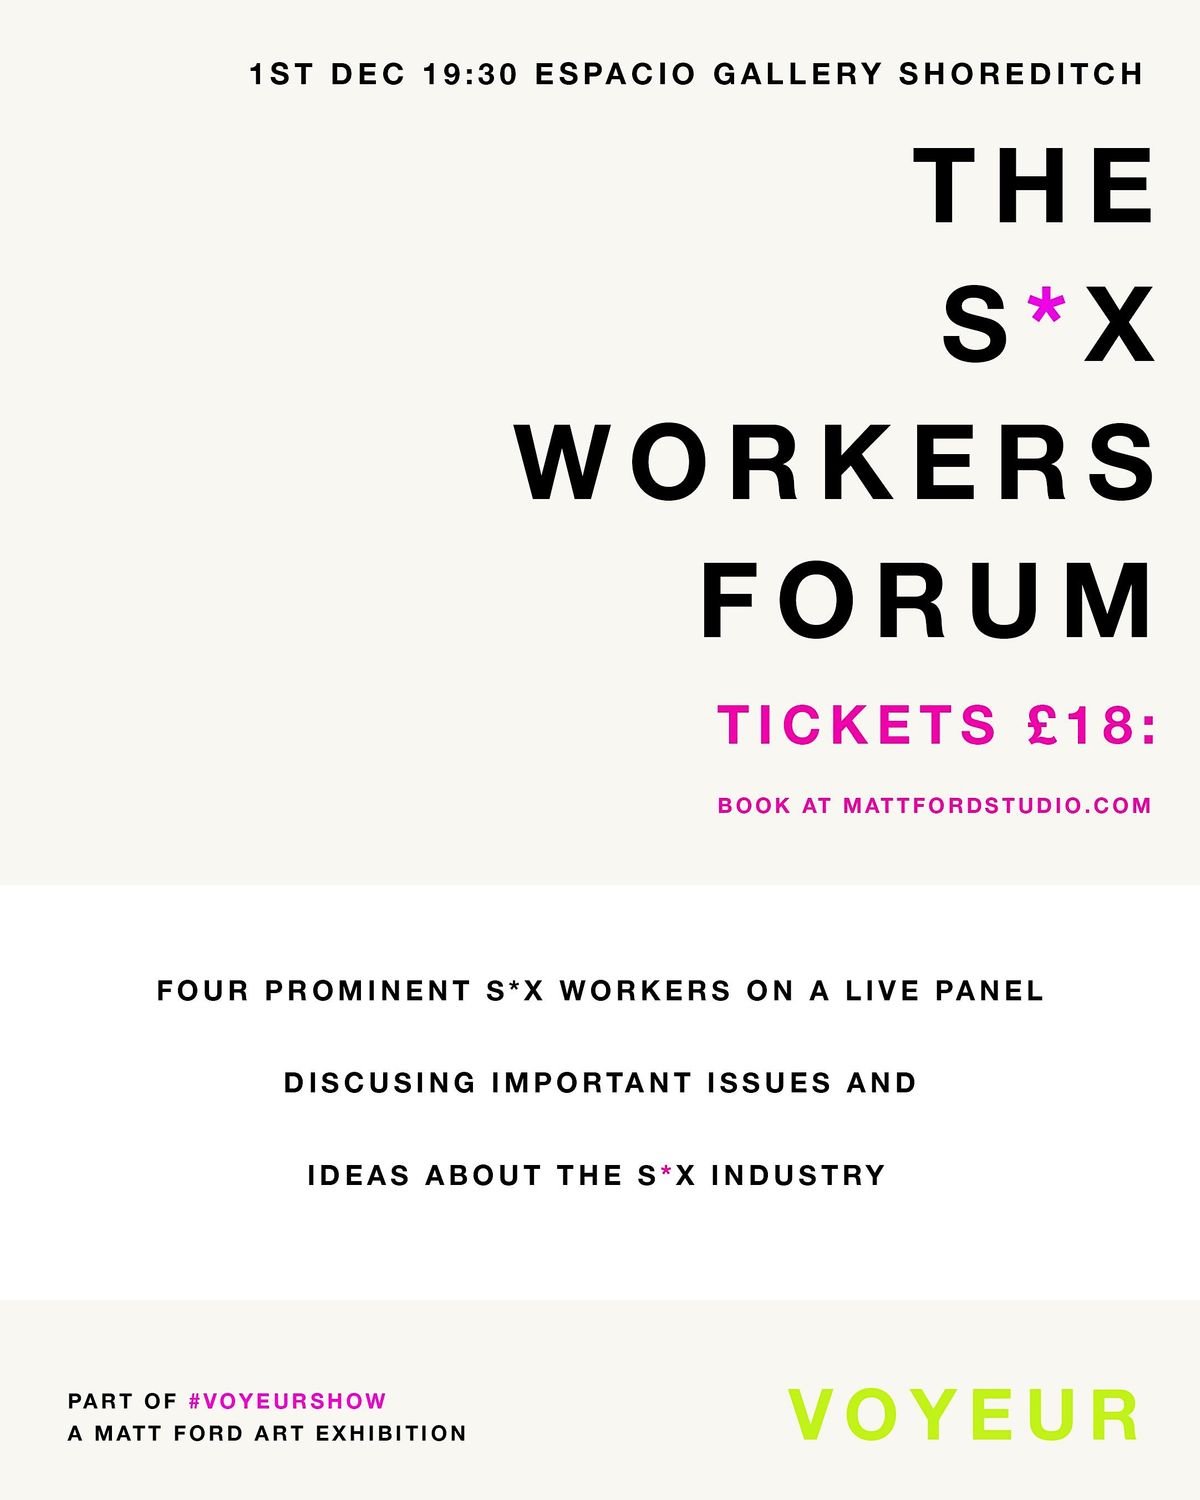 The S*x Workers Forum